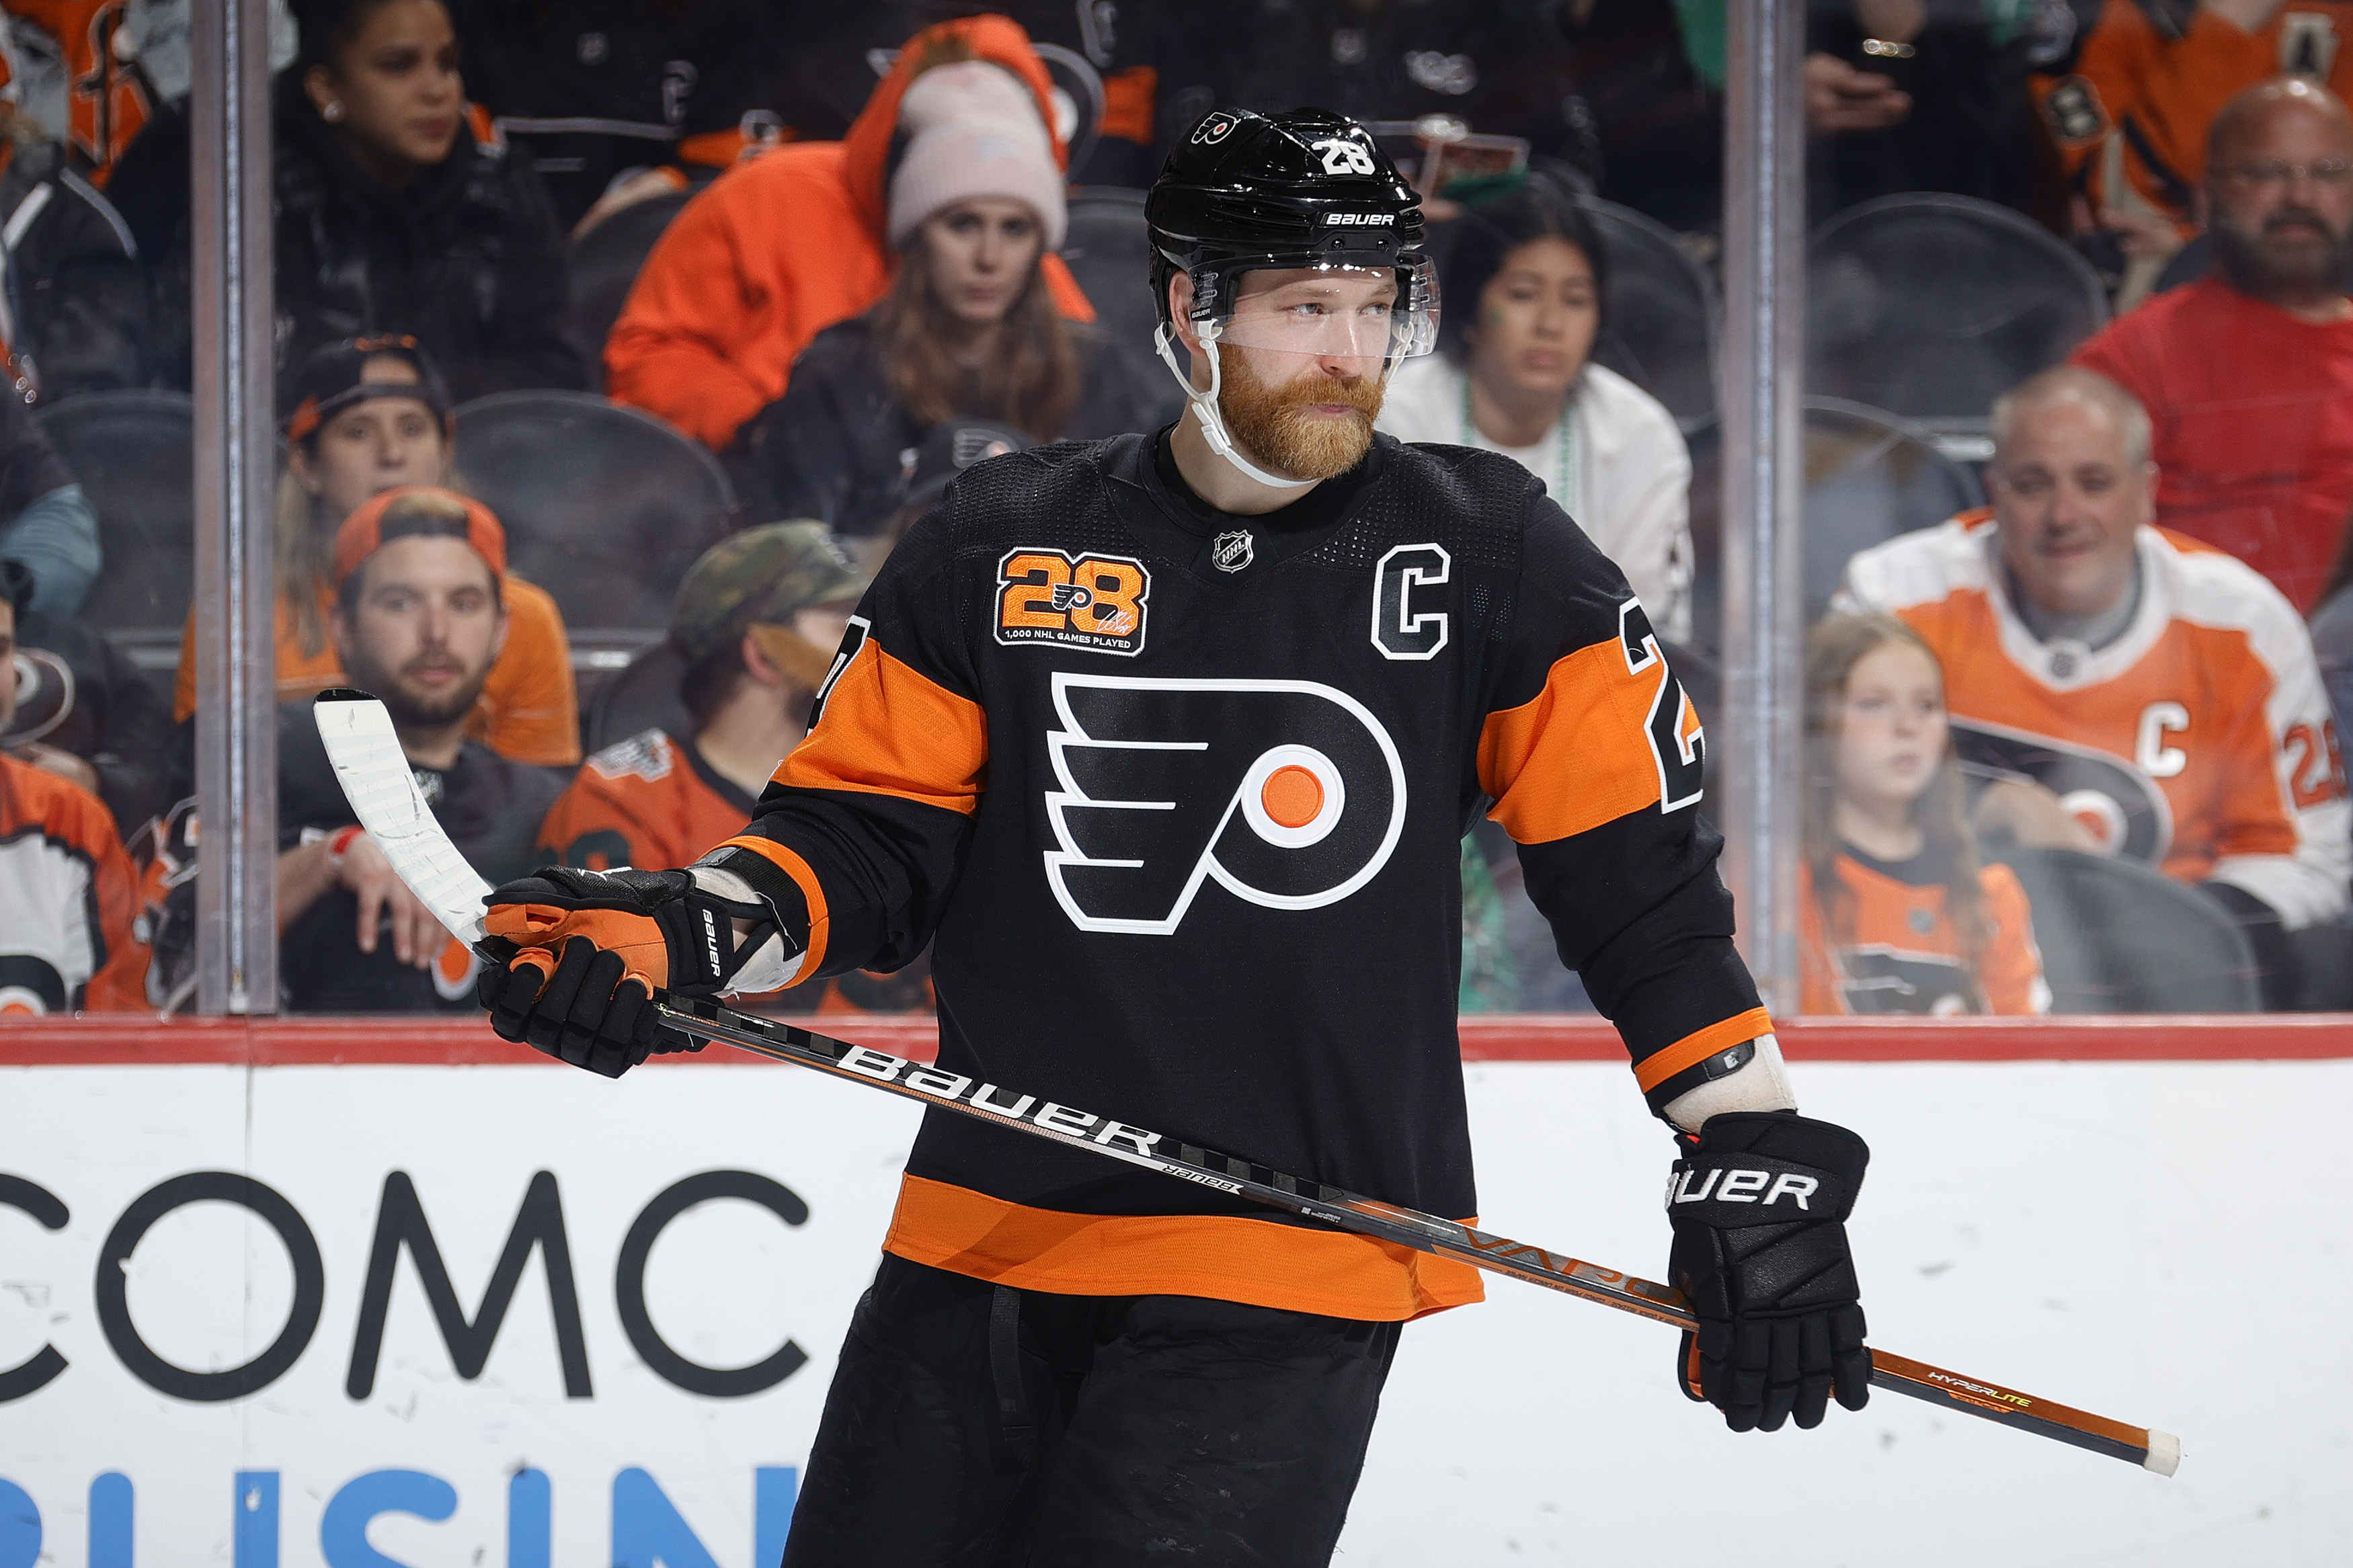 Giroux is making a name for himself, Sports